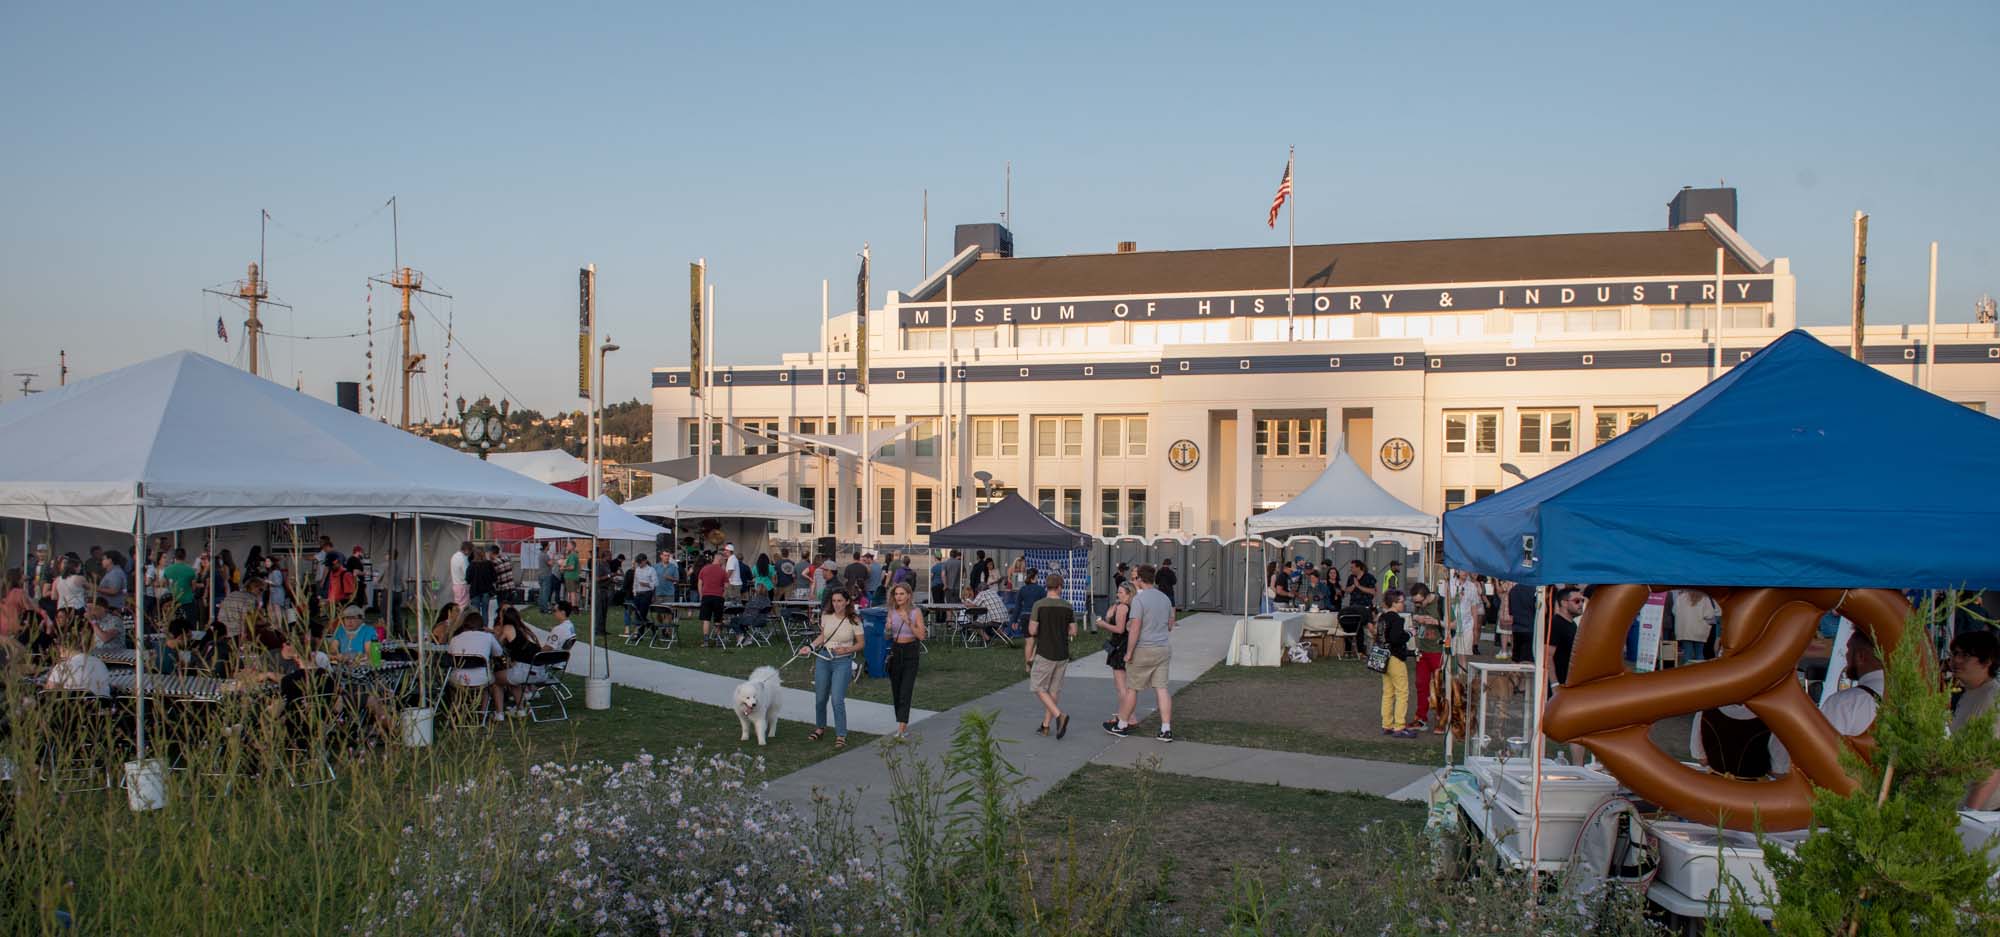 A cider festival with tents and patrons during a summer evening.